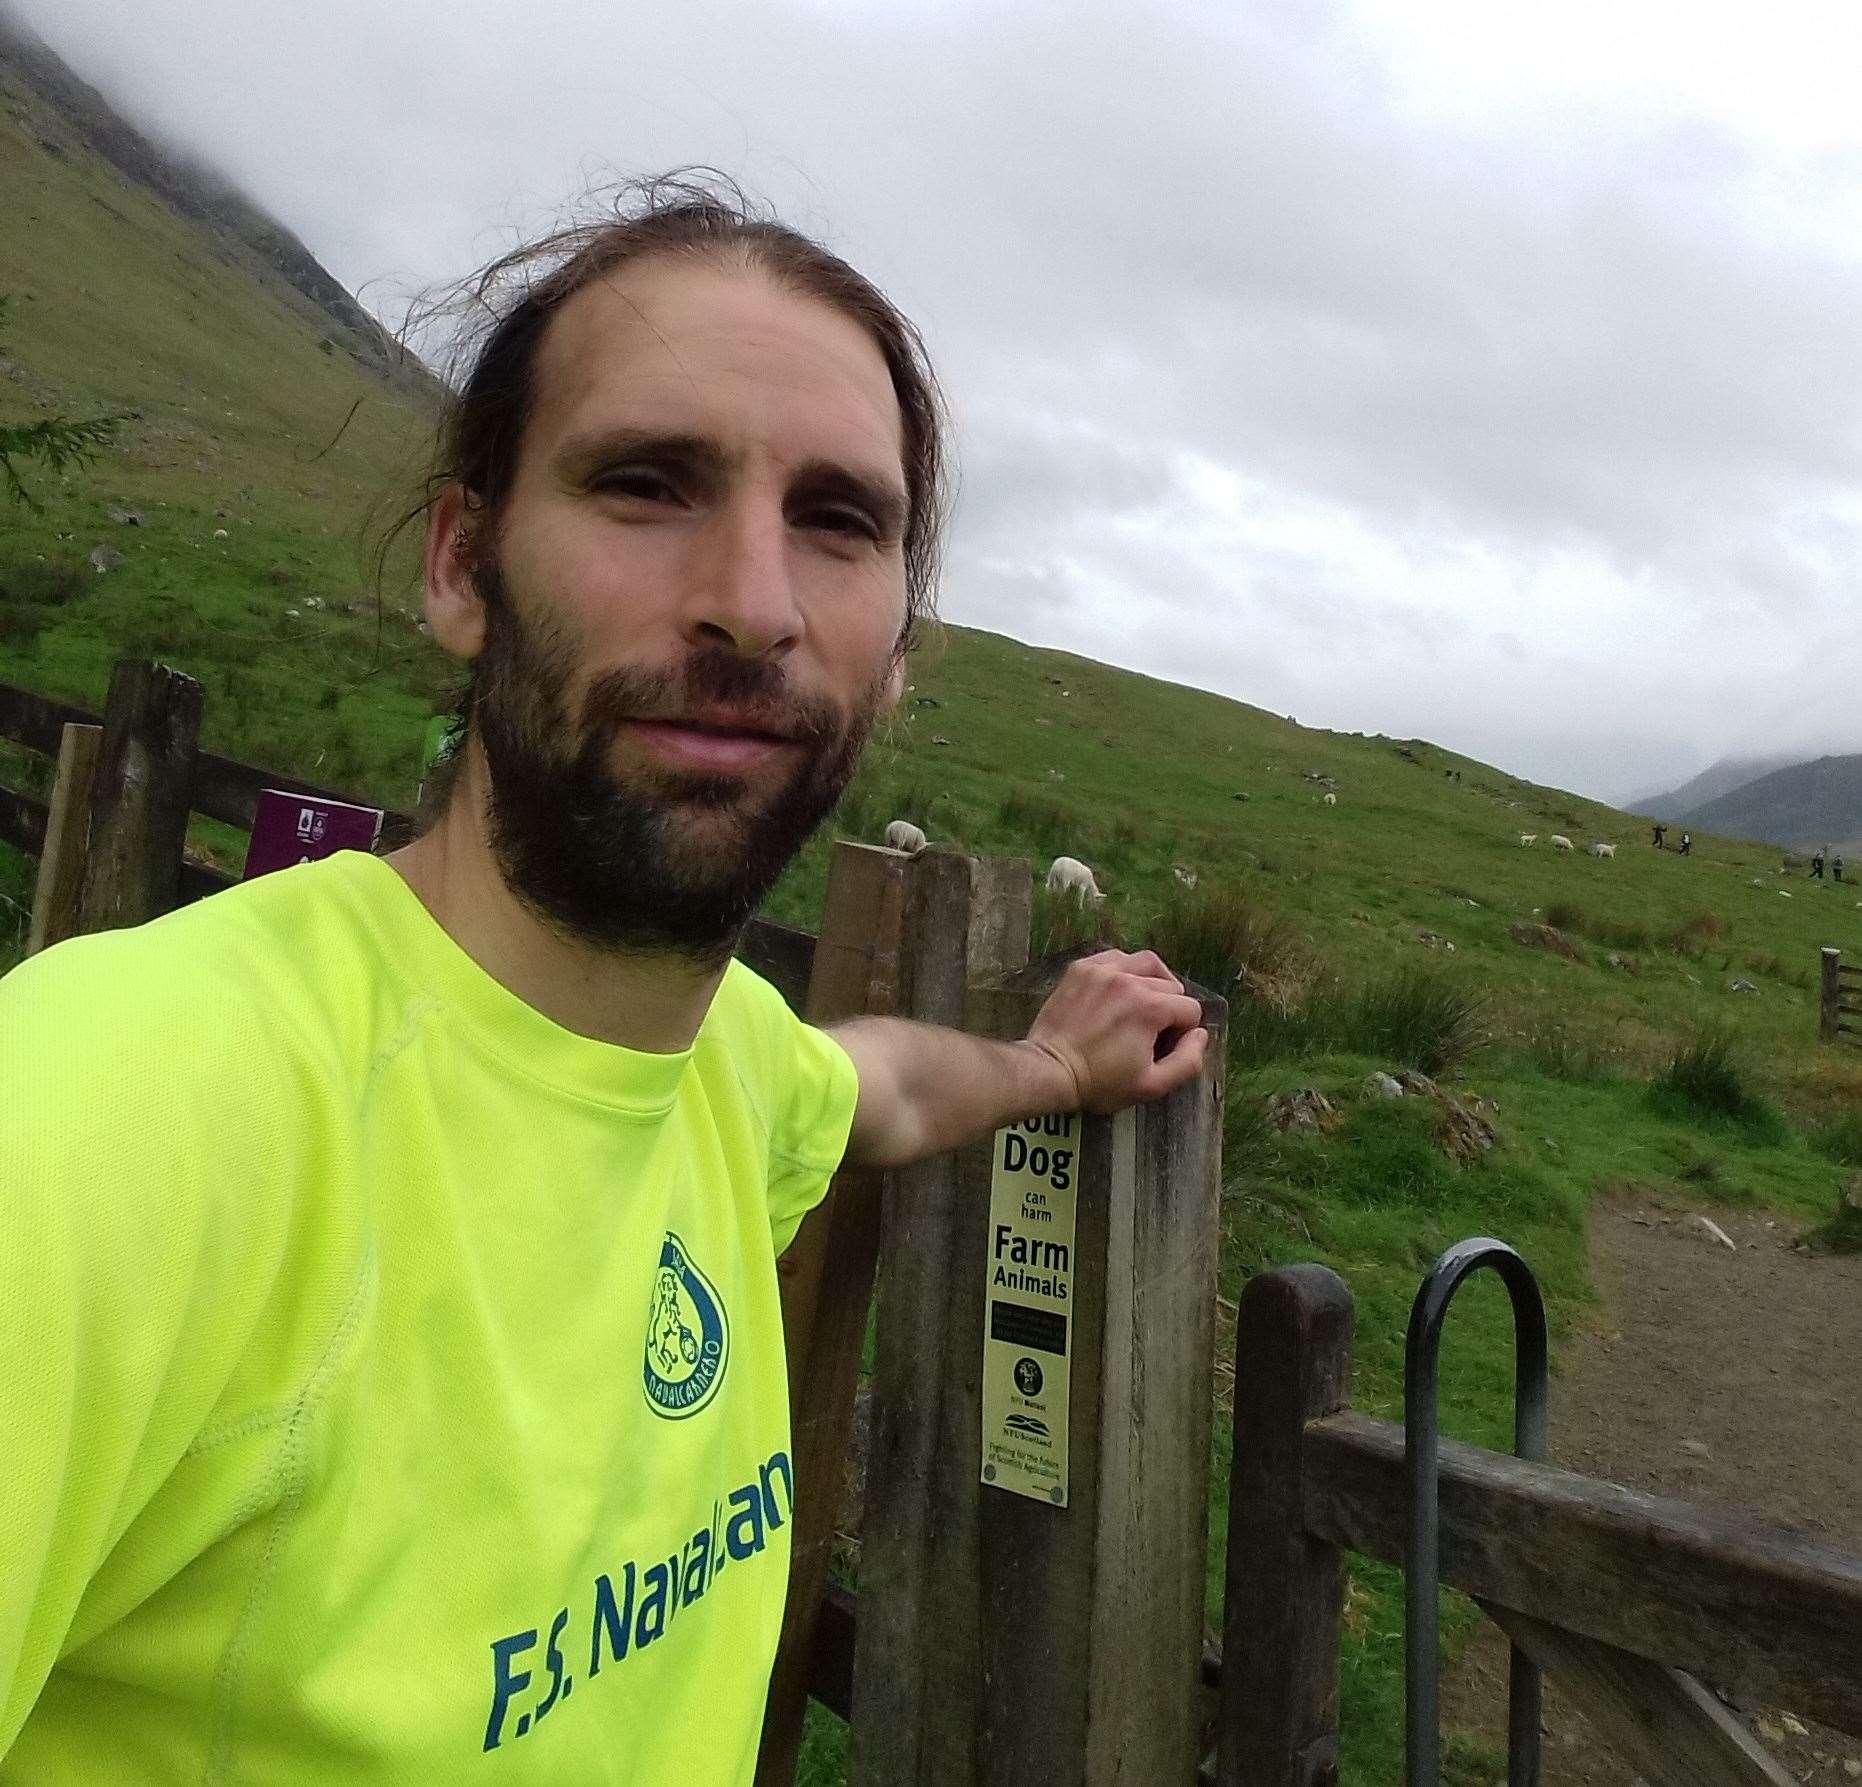 Javi Cabrera Valdes completed the Ben Nevis route 7 times from Ben Inn carpark to the summit up and down to the Tourist path in 24 hours.